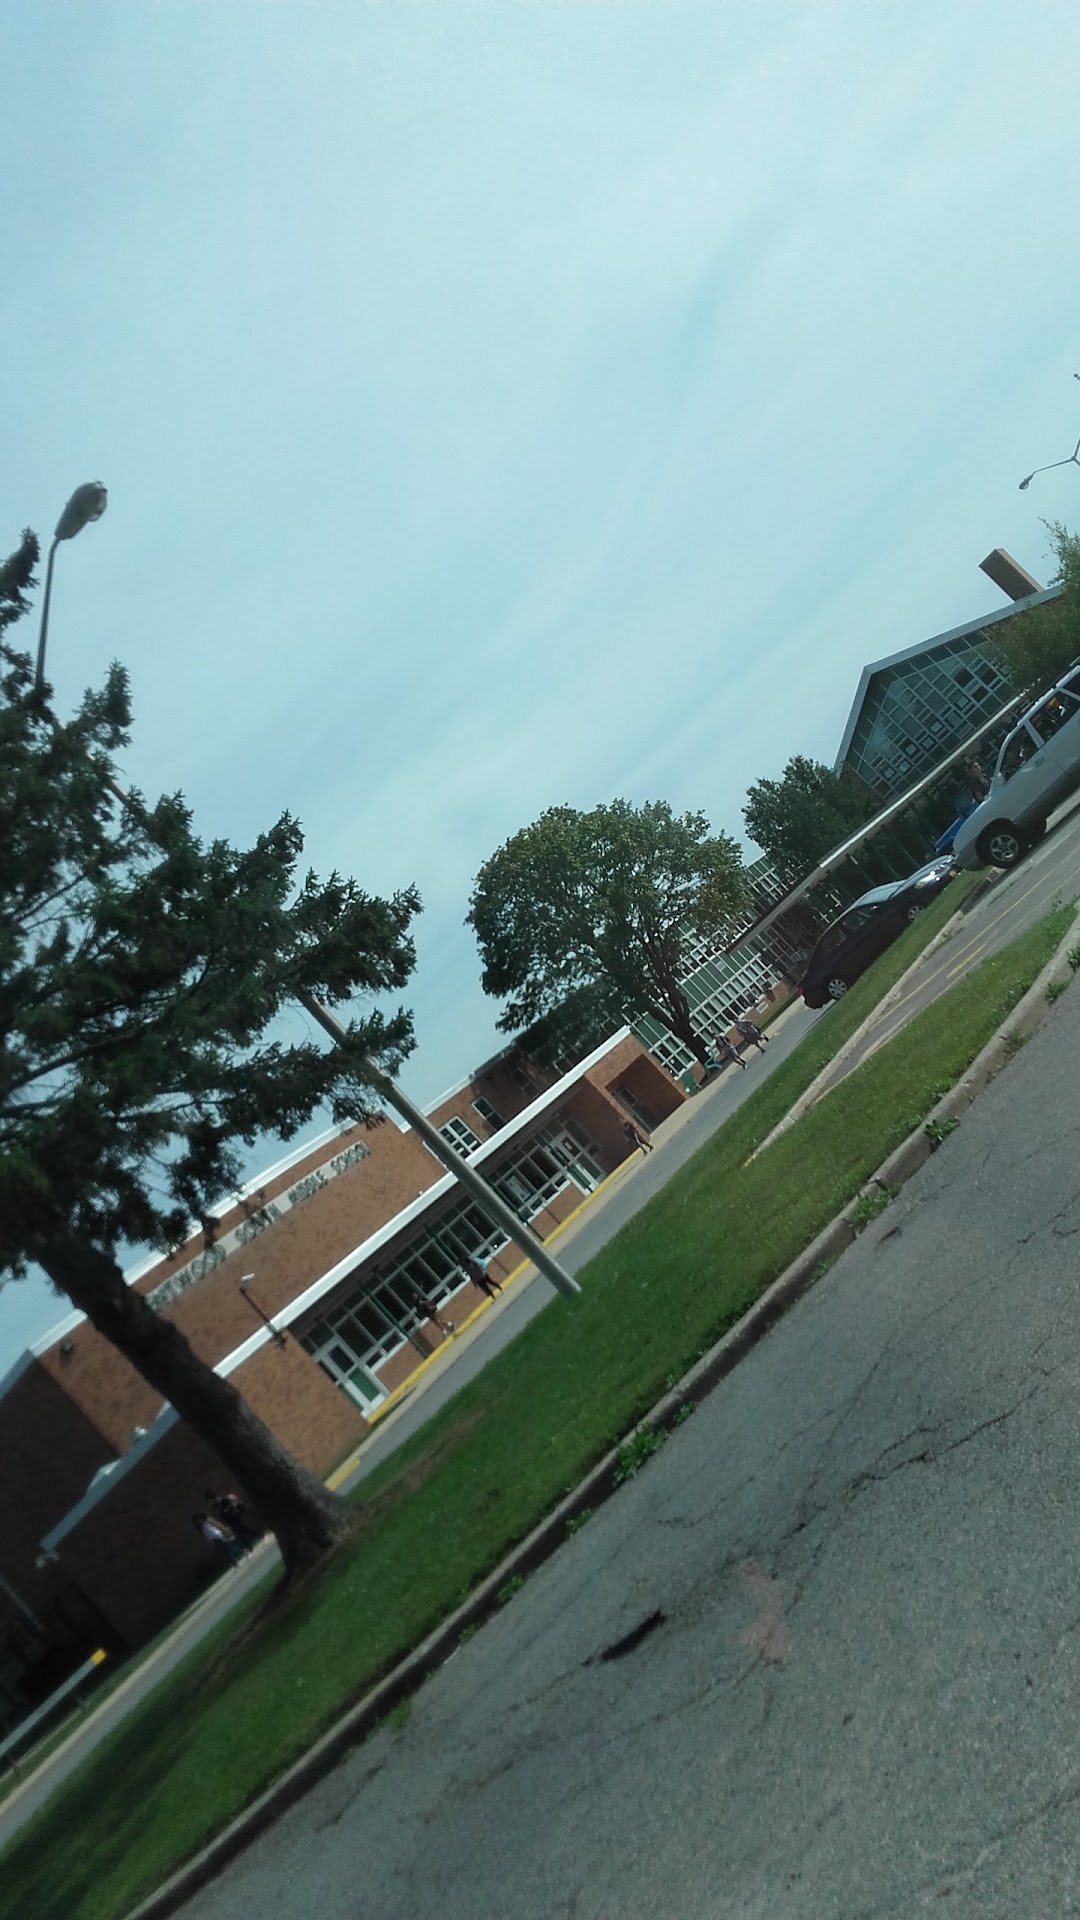 South Middle School